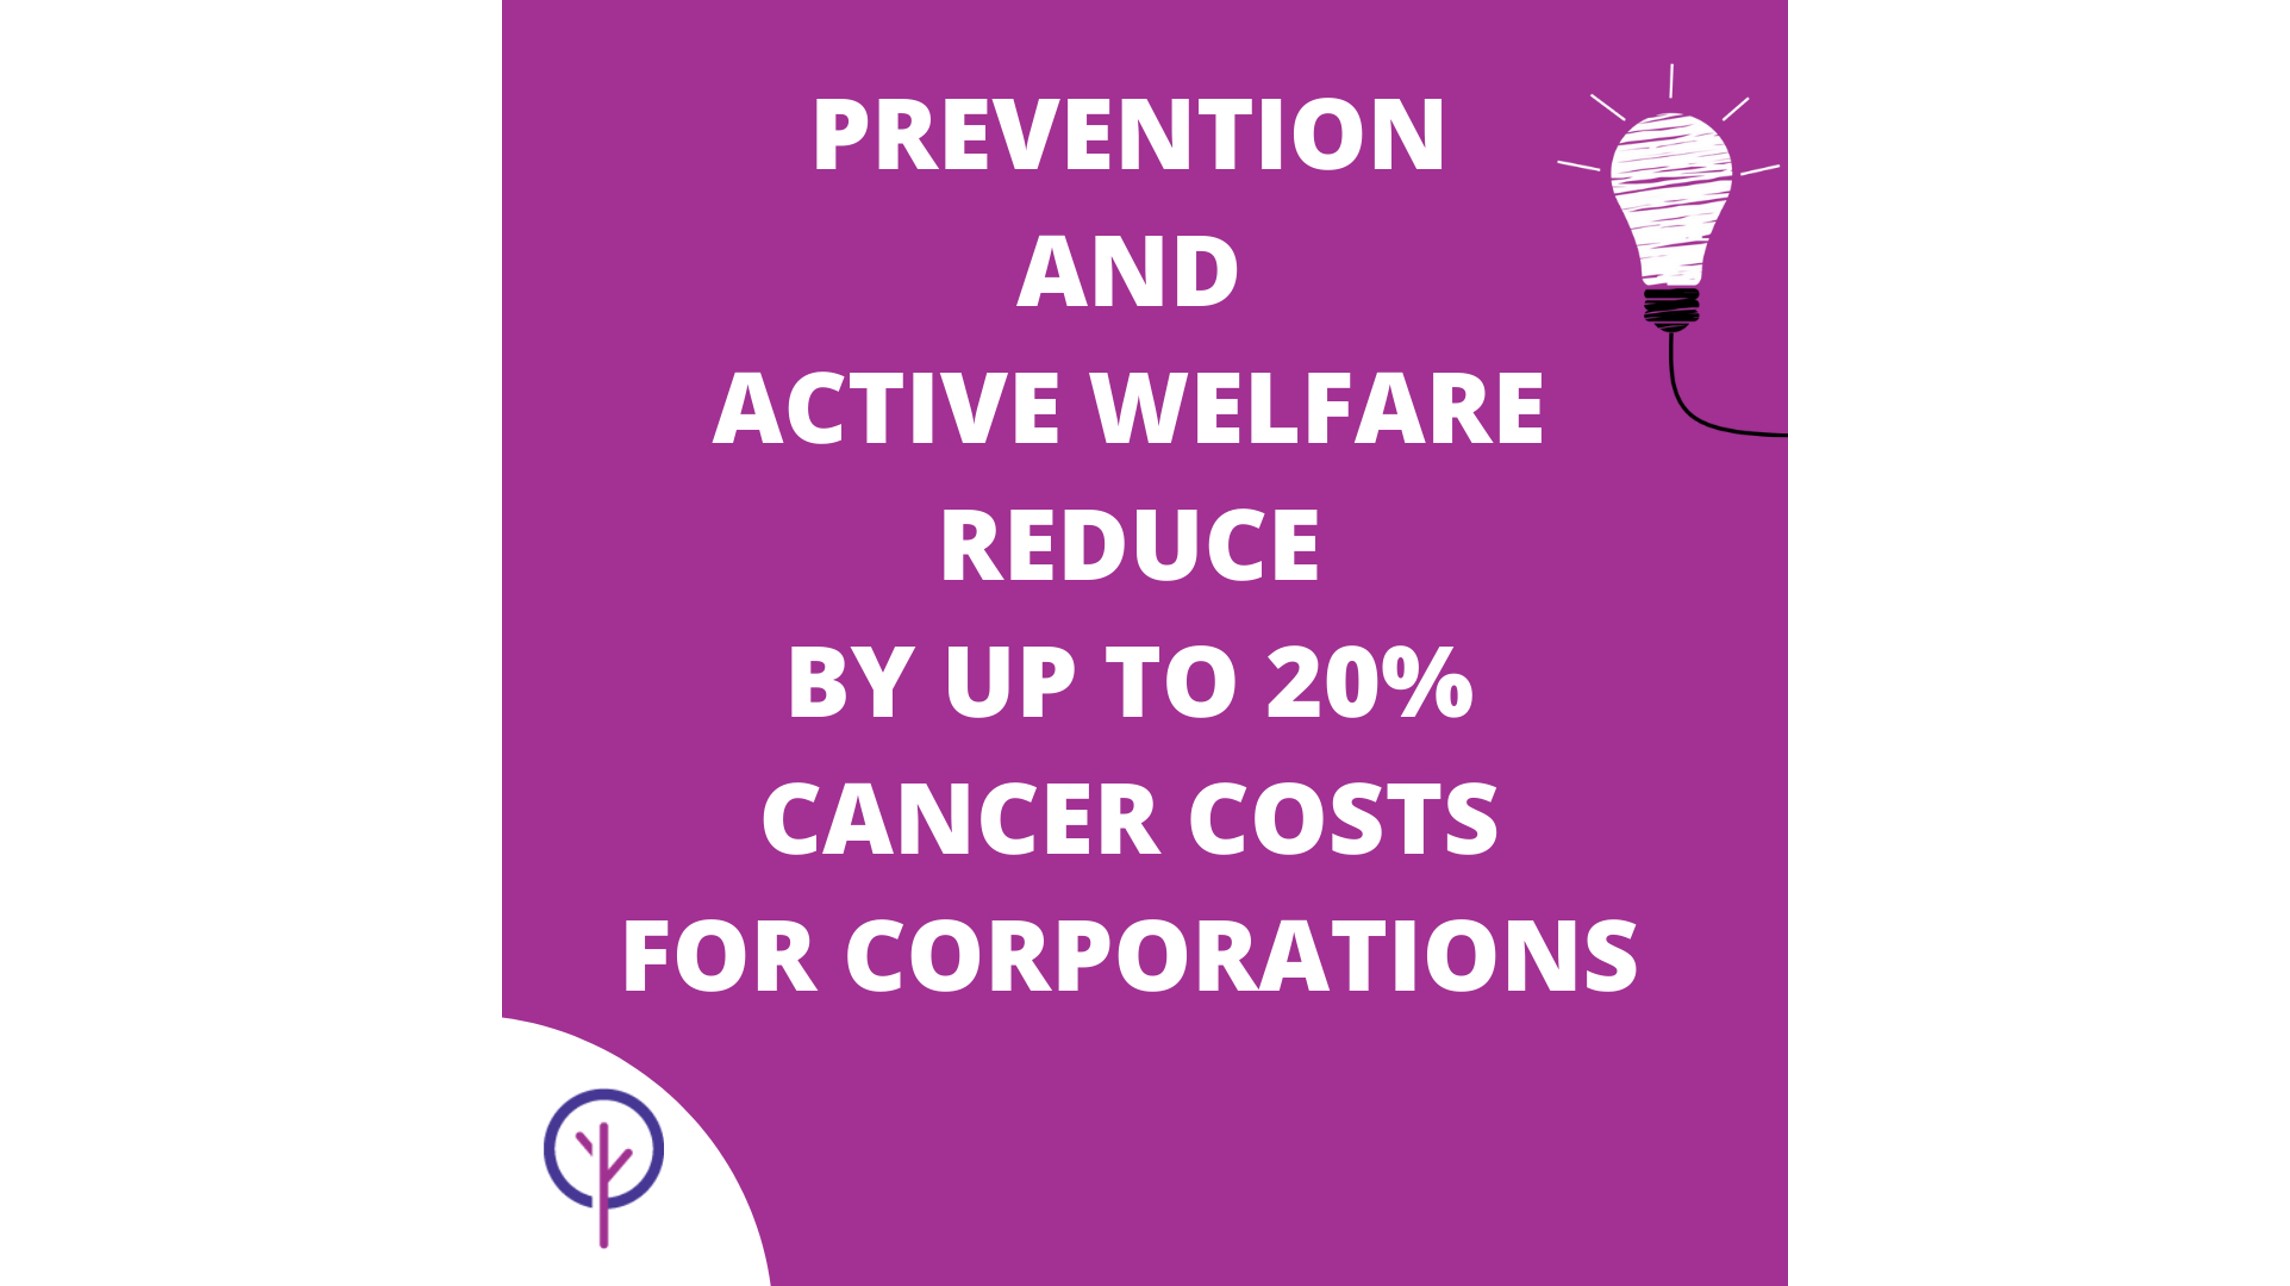 Prevention and active welfare can reduce cancer costs for corporations by up to 20% - Knowandbe.live